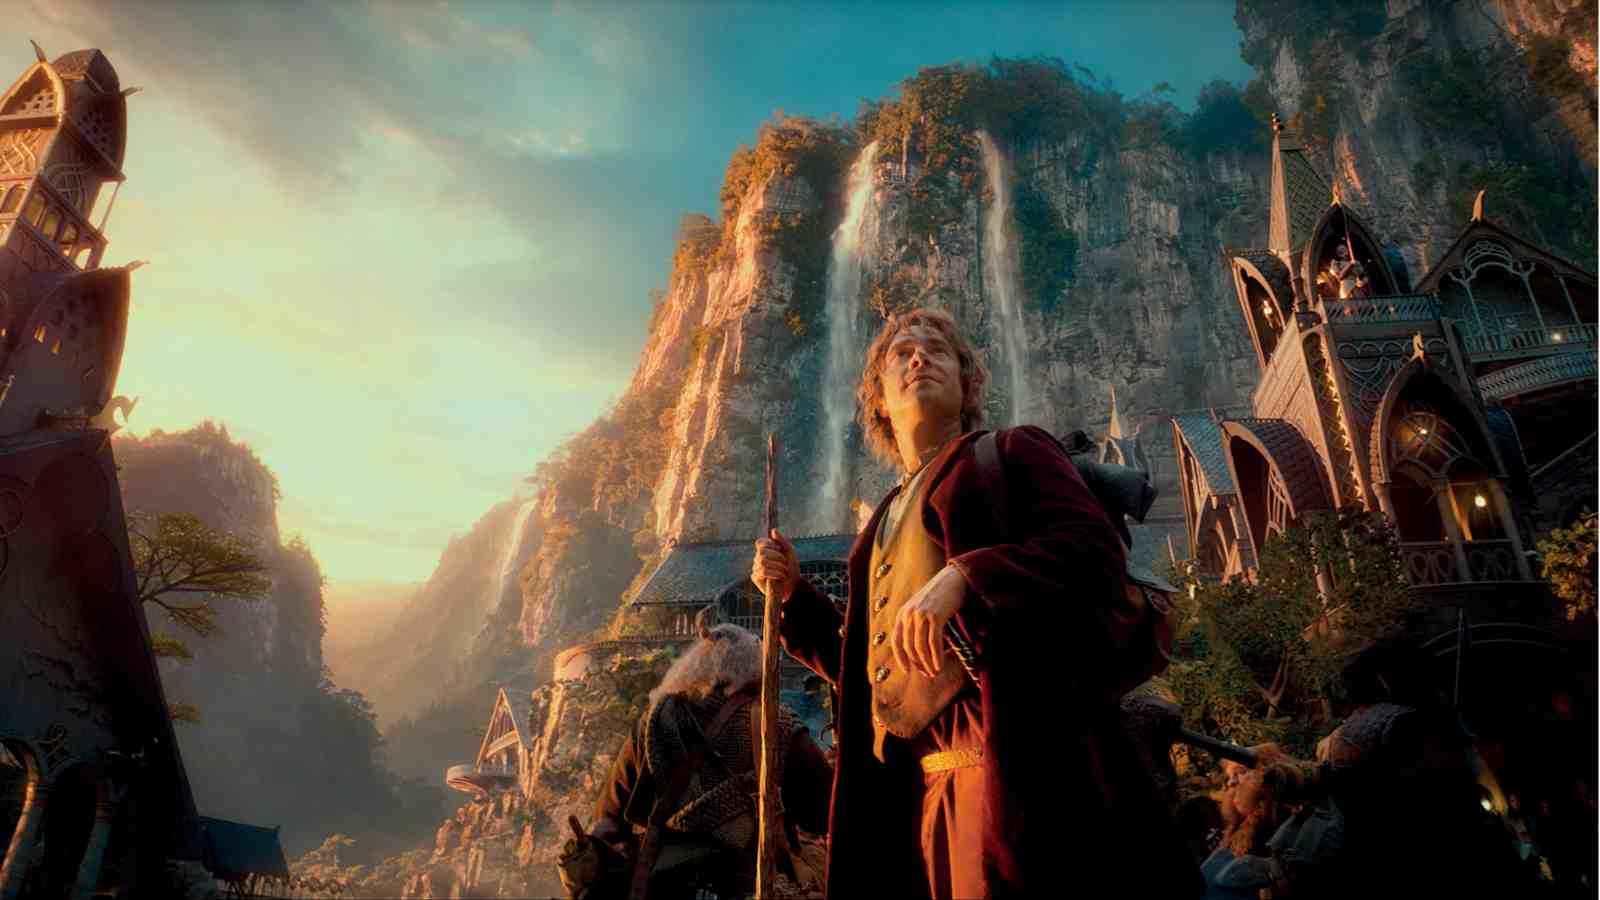 Image from the third Hobbit film